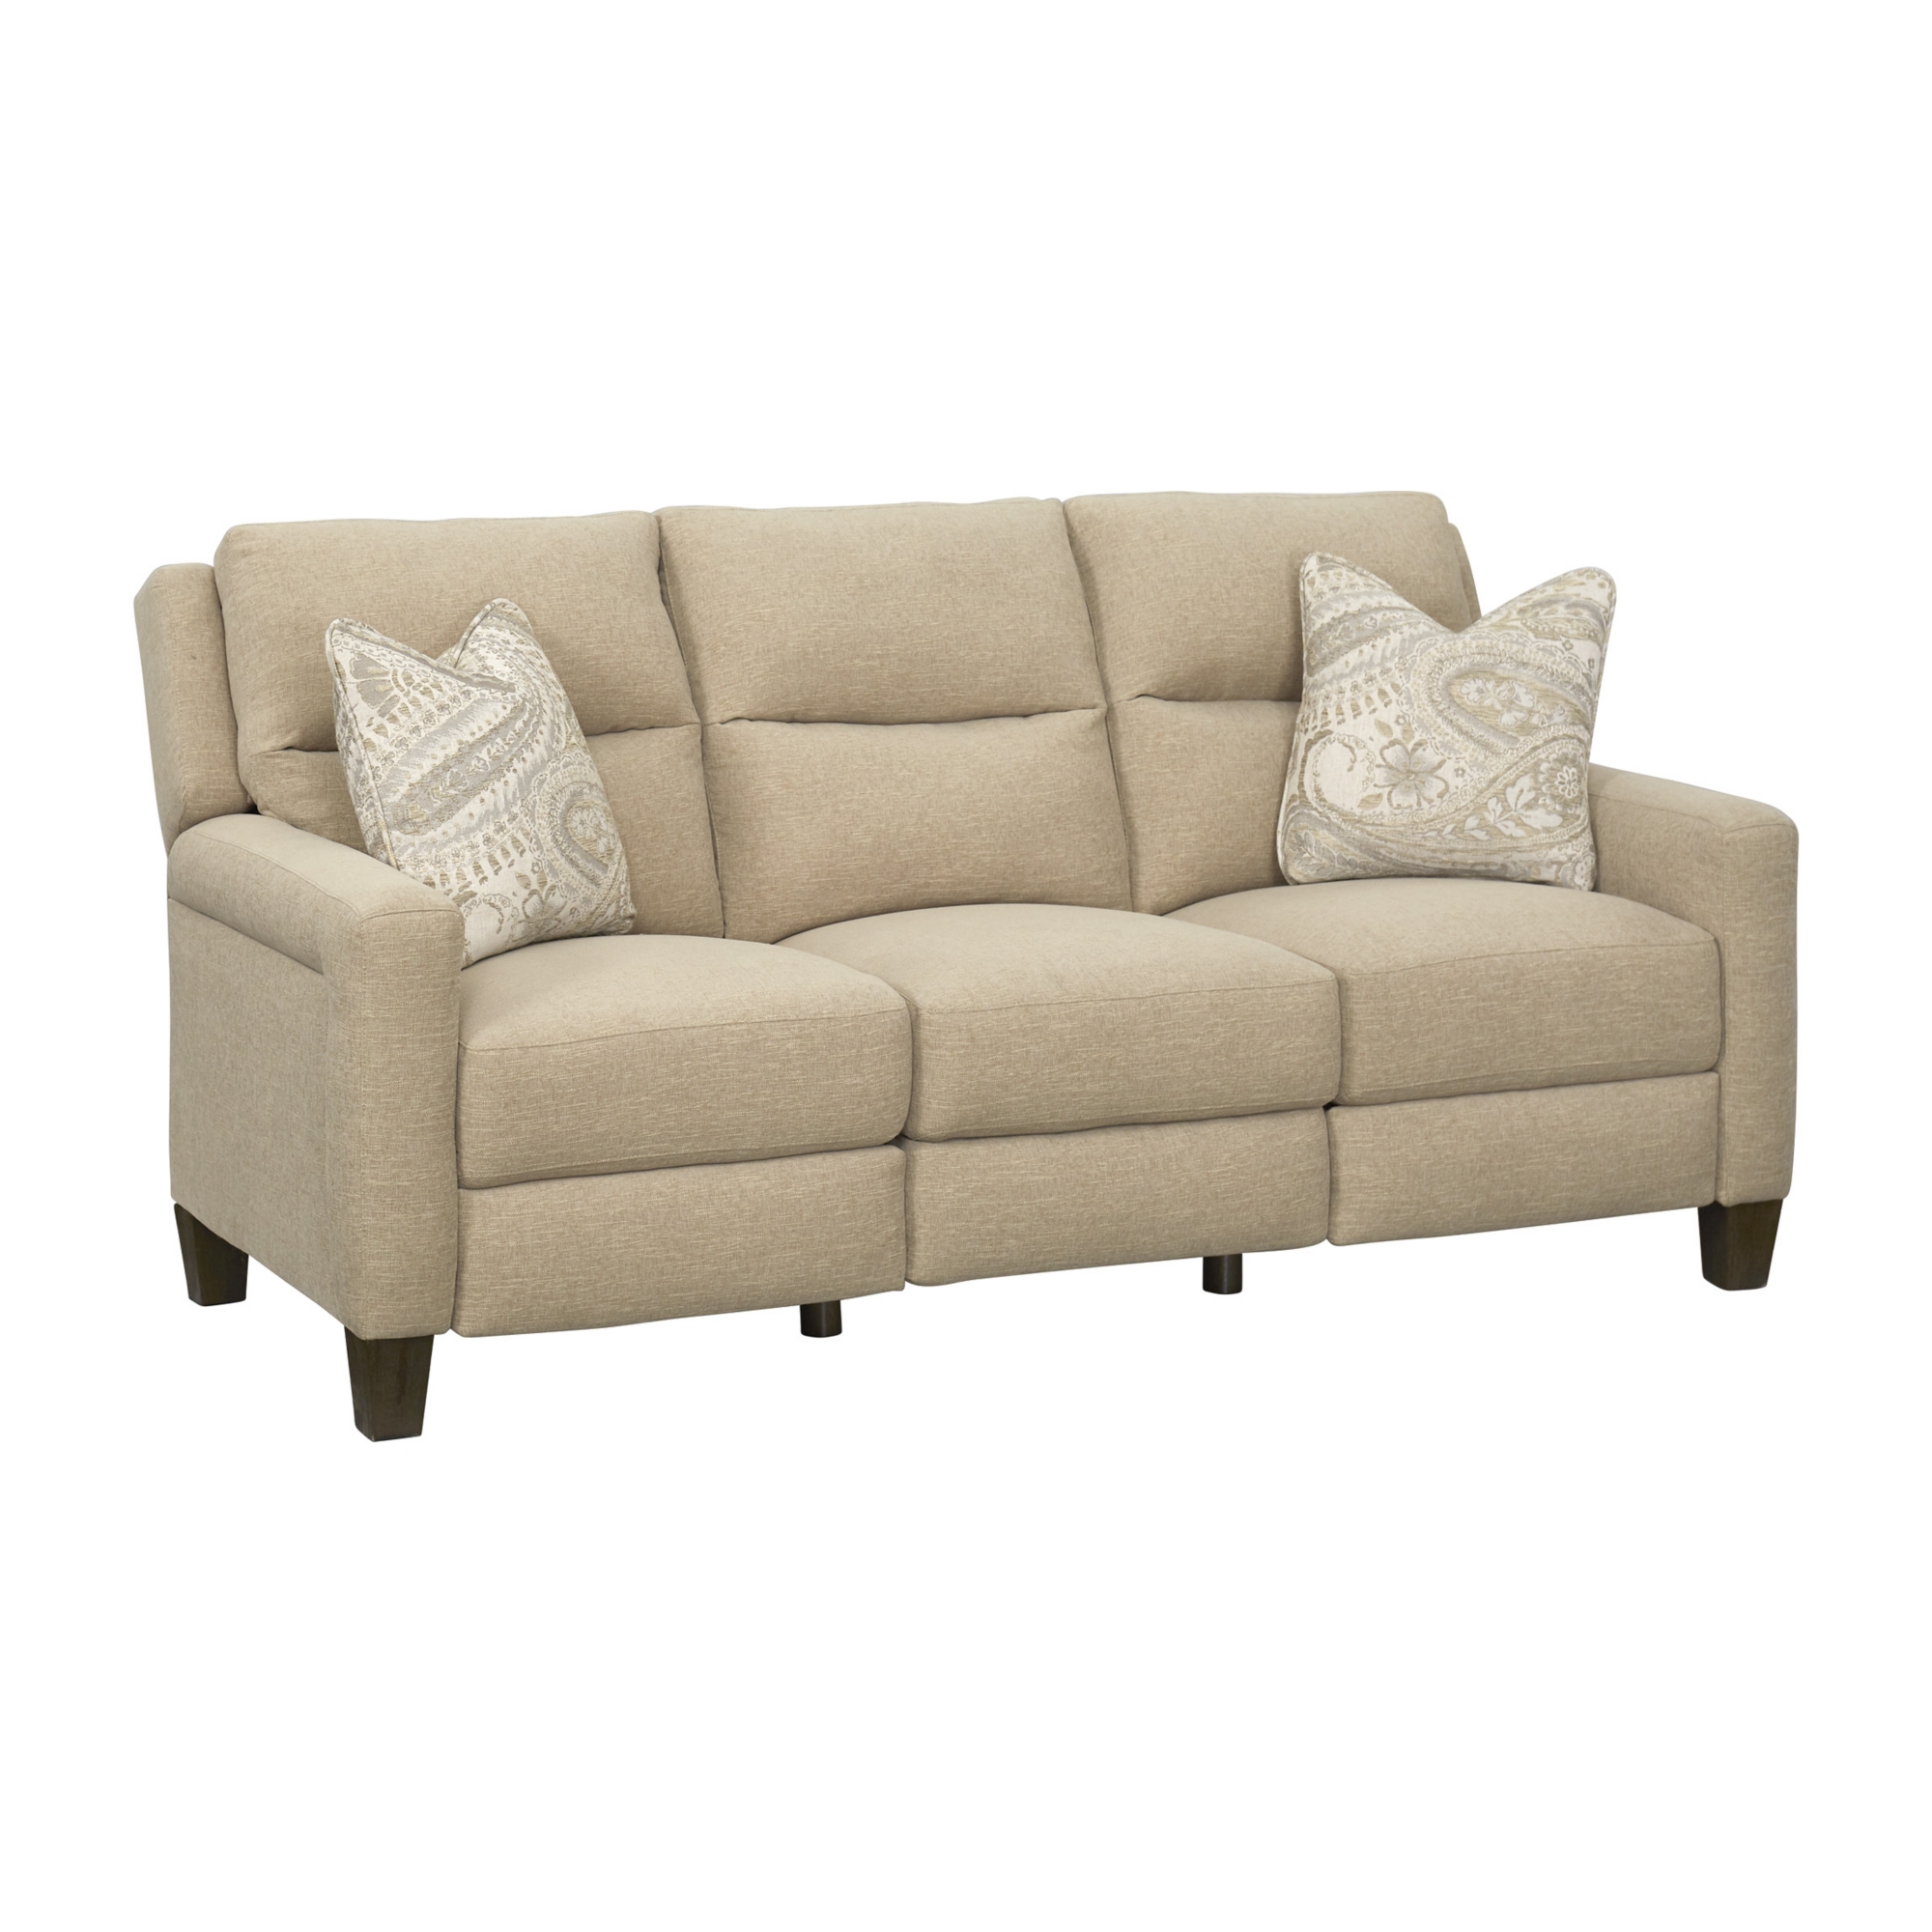 Ava Sofa Find The Perfect Style, Havertys Sectional Sofa Reviews